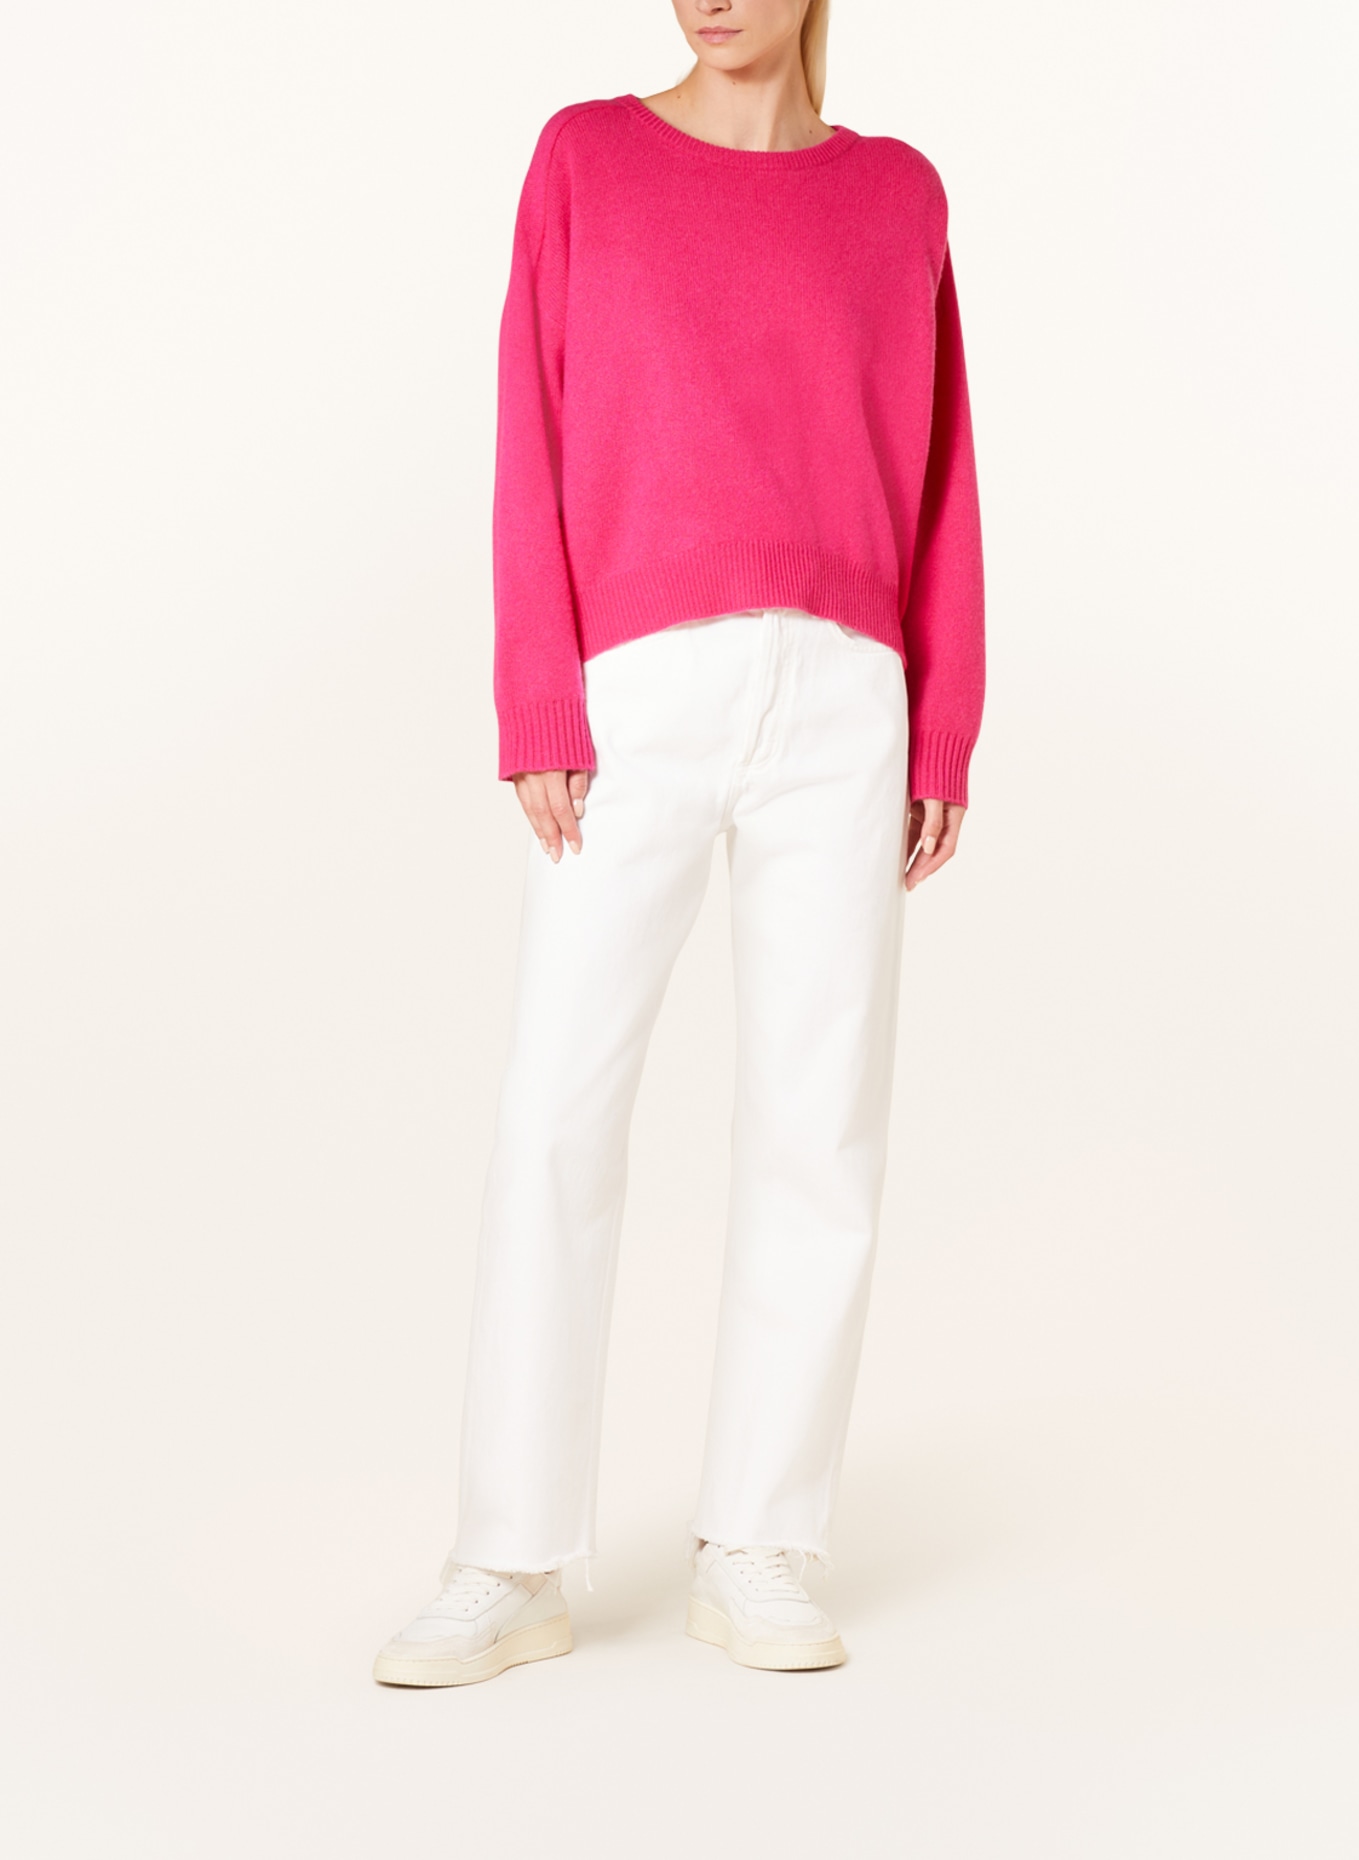 (THE MERCER) N.Y. Cashmere-Pullover, Farbe: PINK (Bild 2)